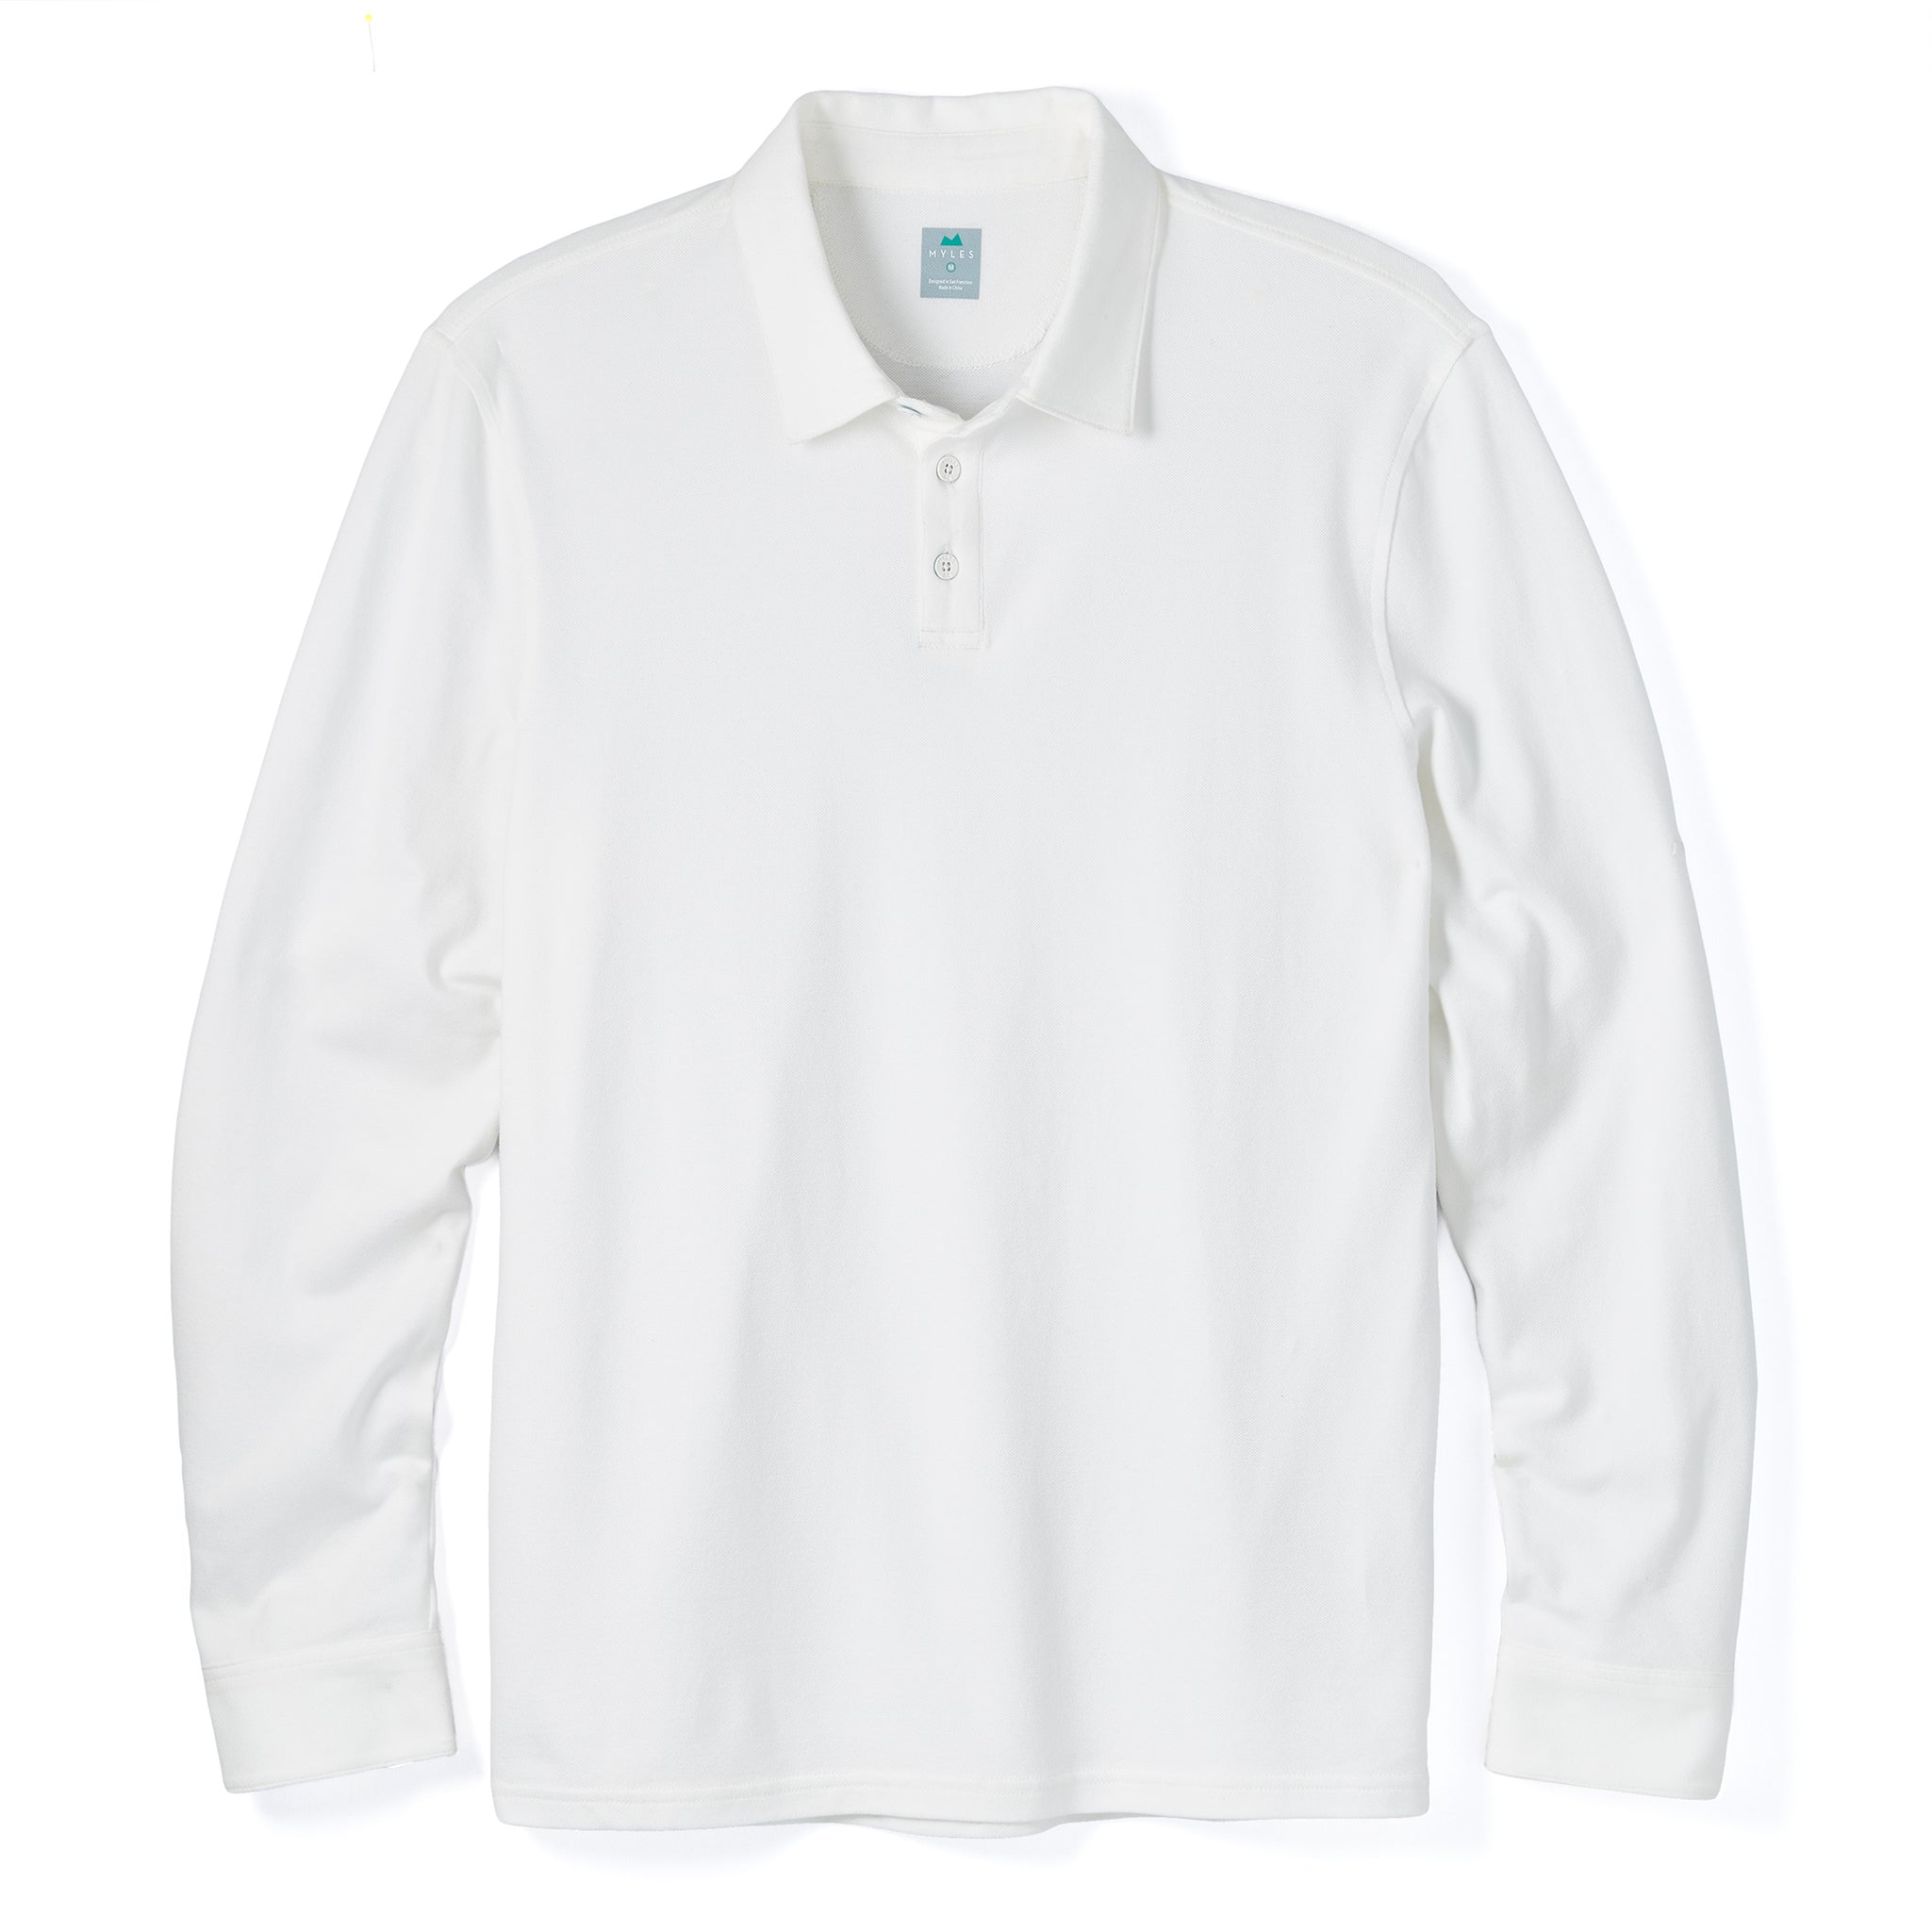 White Long Sleeve Hand-stitched Polo Shirt - The Fleece Milano